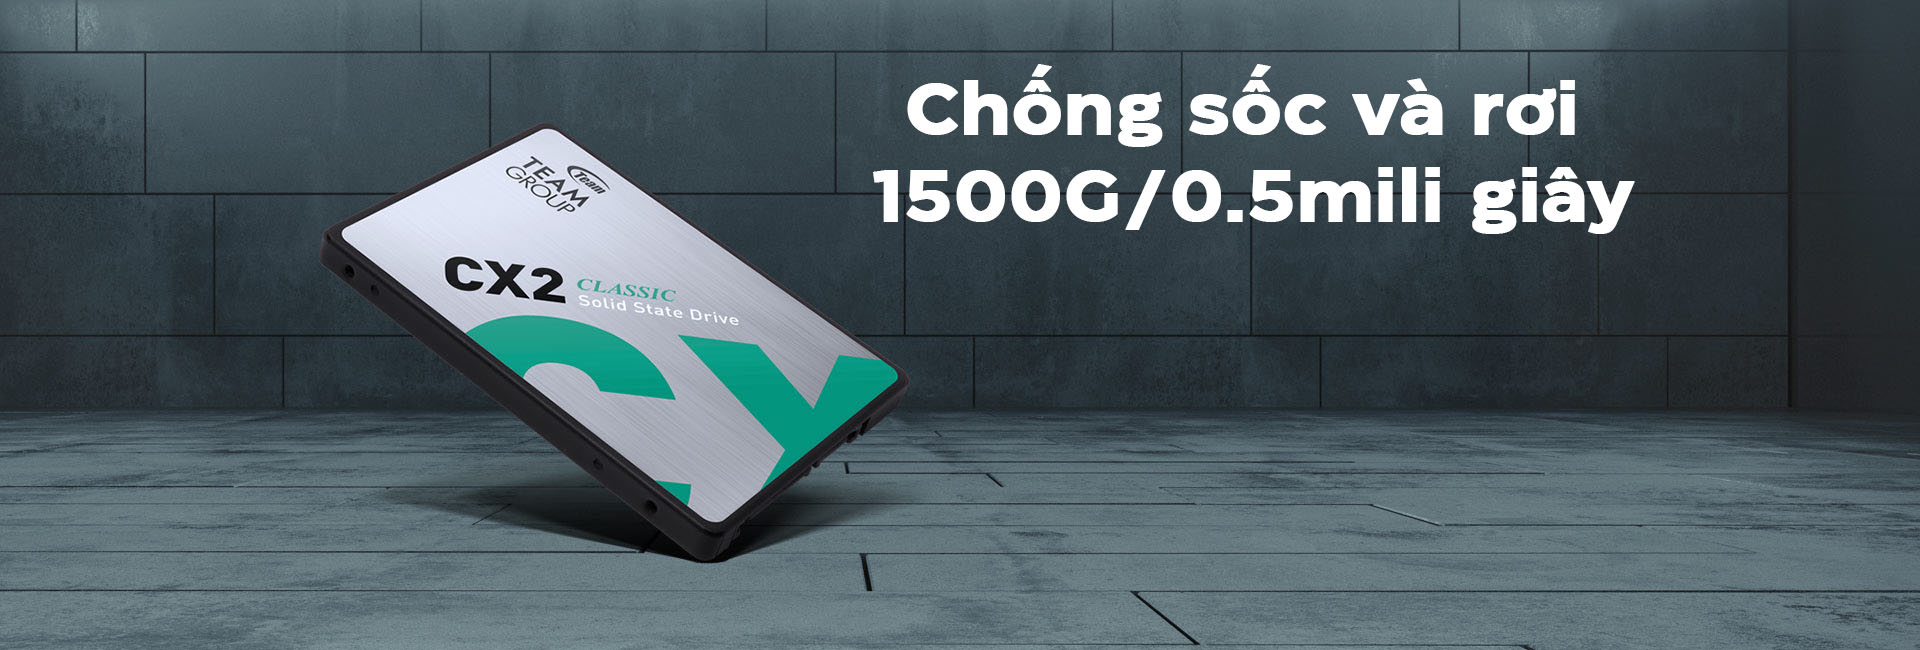 Ổ cứng SSD Teamgroup CX2 